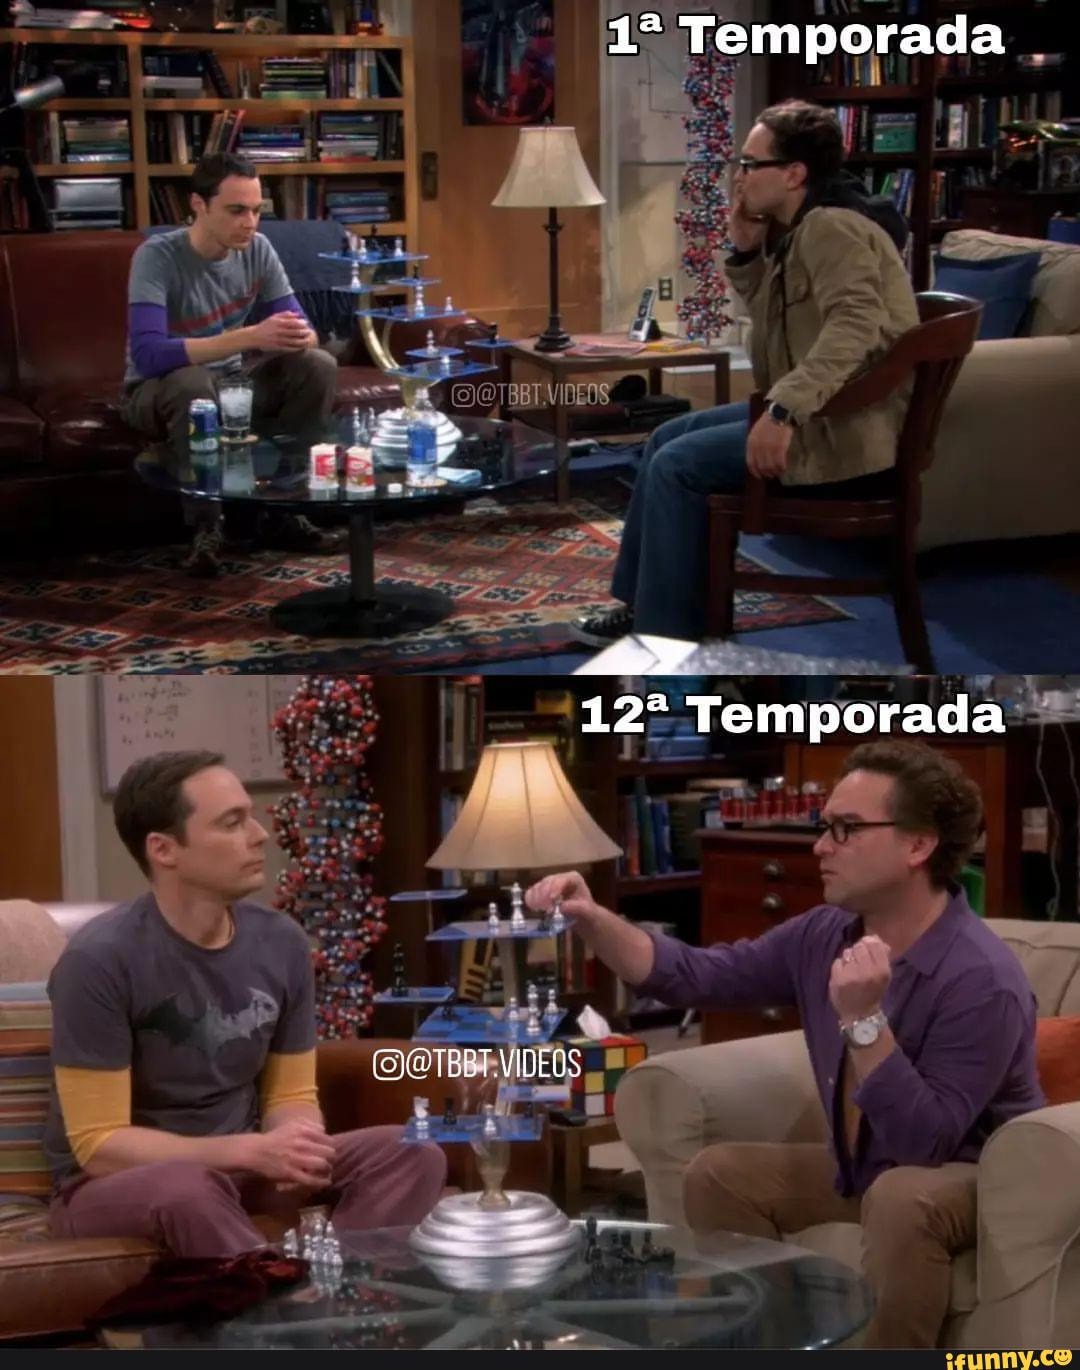 Temporada memes. Best Collection of funny Temporada pictures on